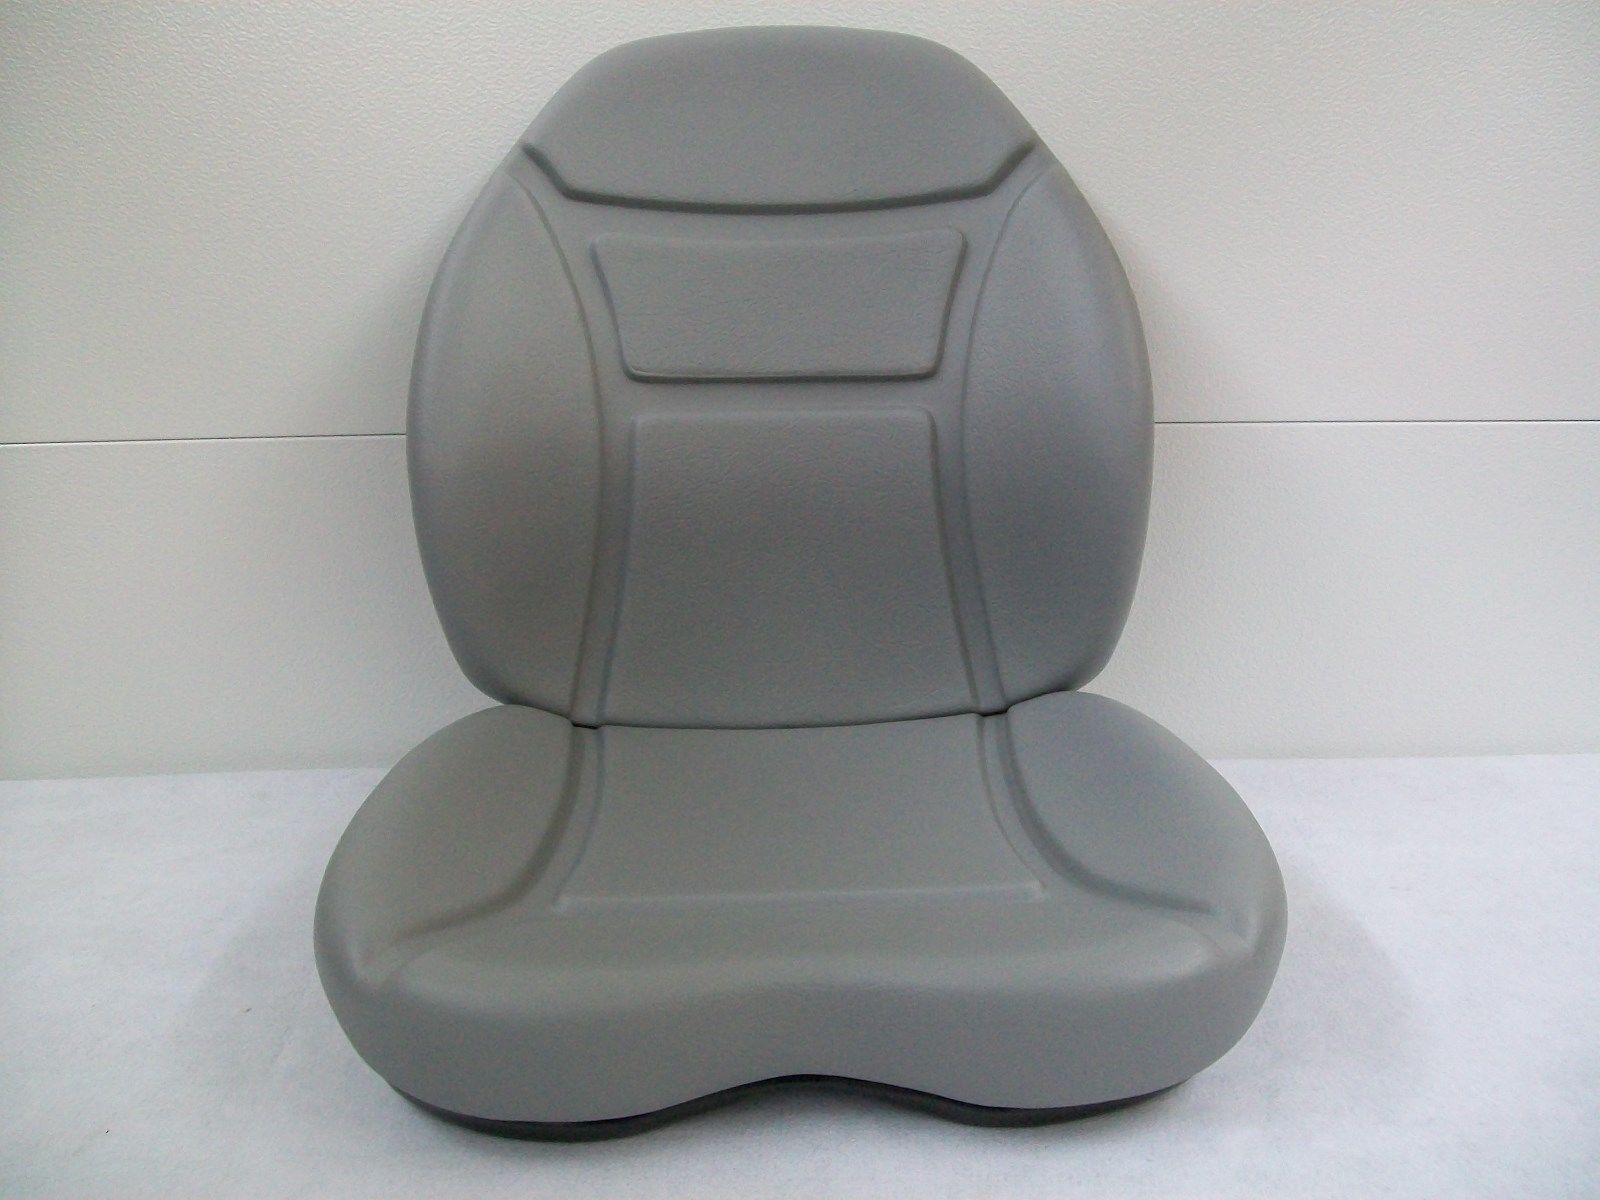 Wholesale lawn mower seat cushion For A Lush And Immaculate Lawn 